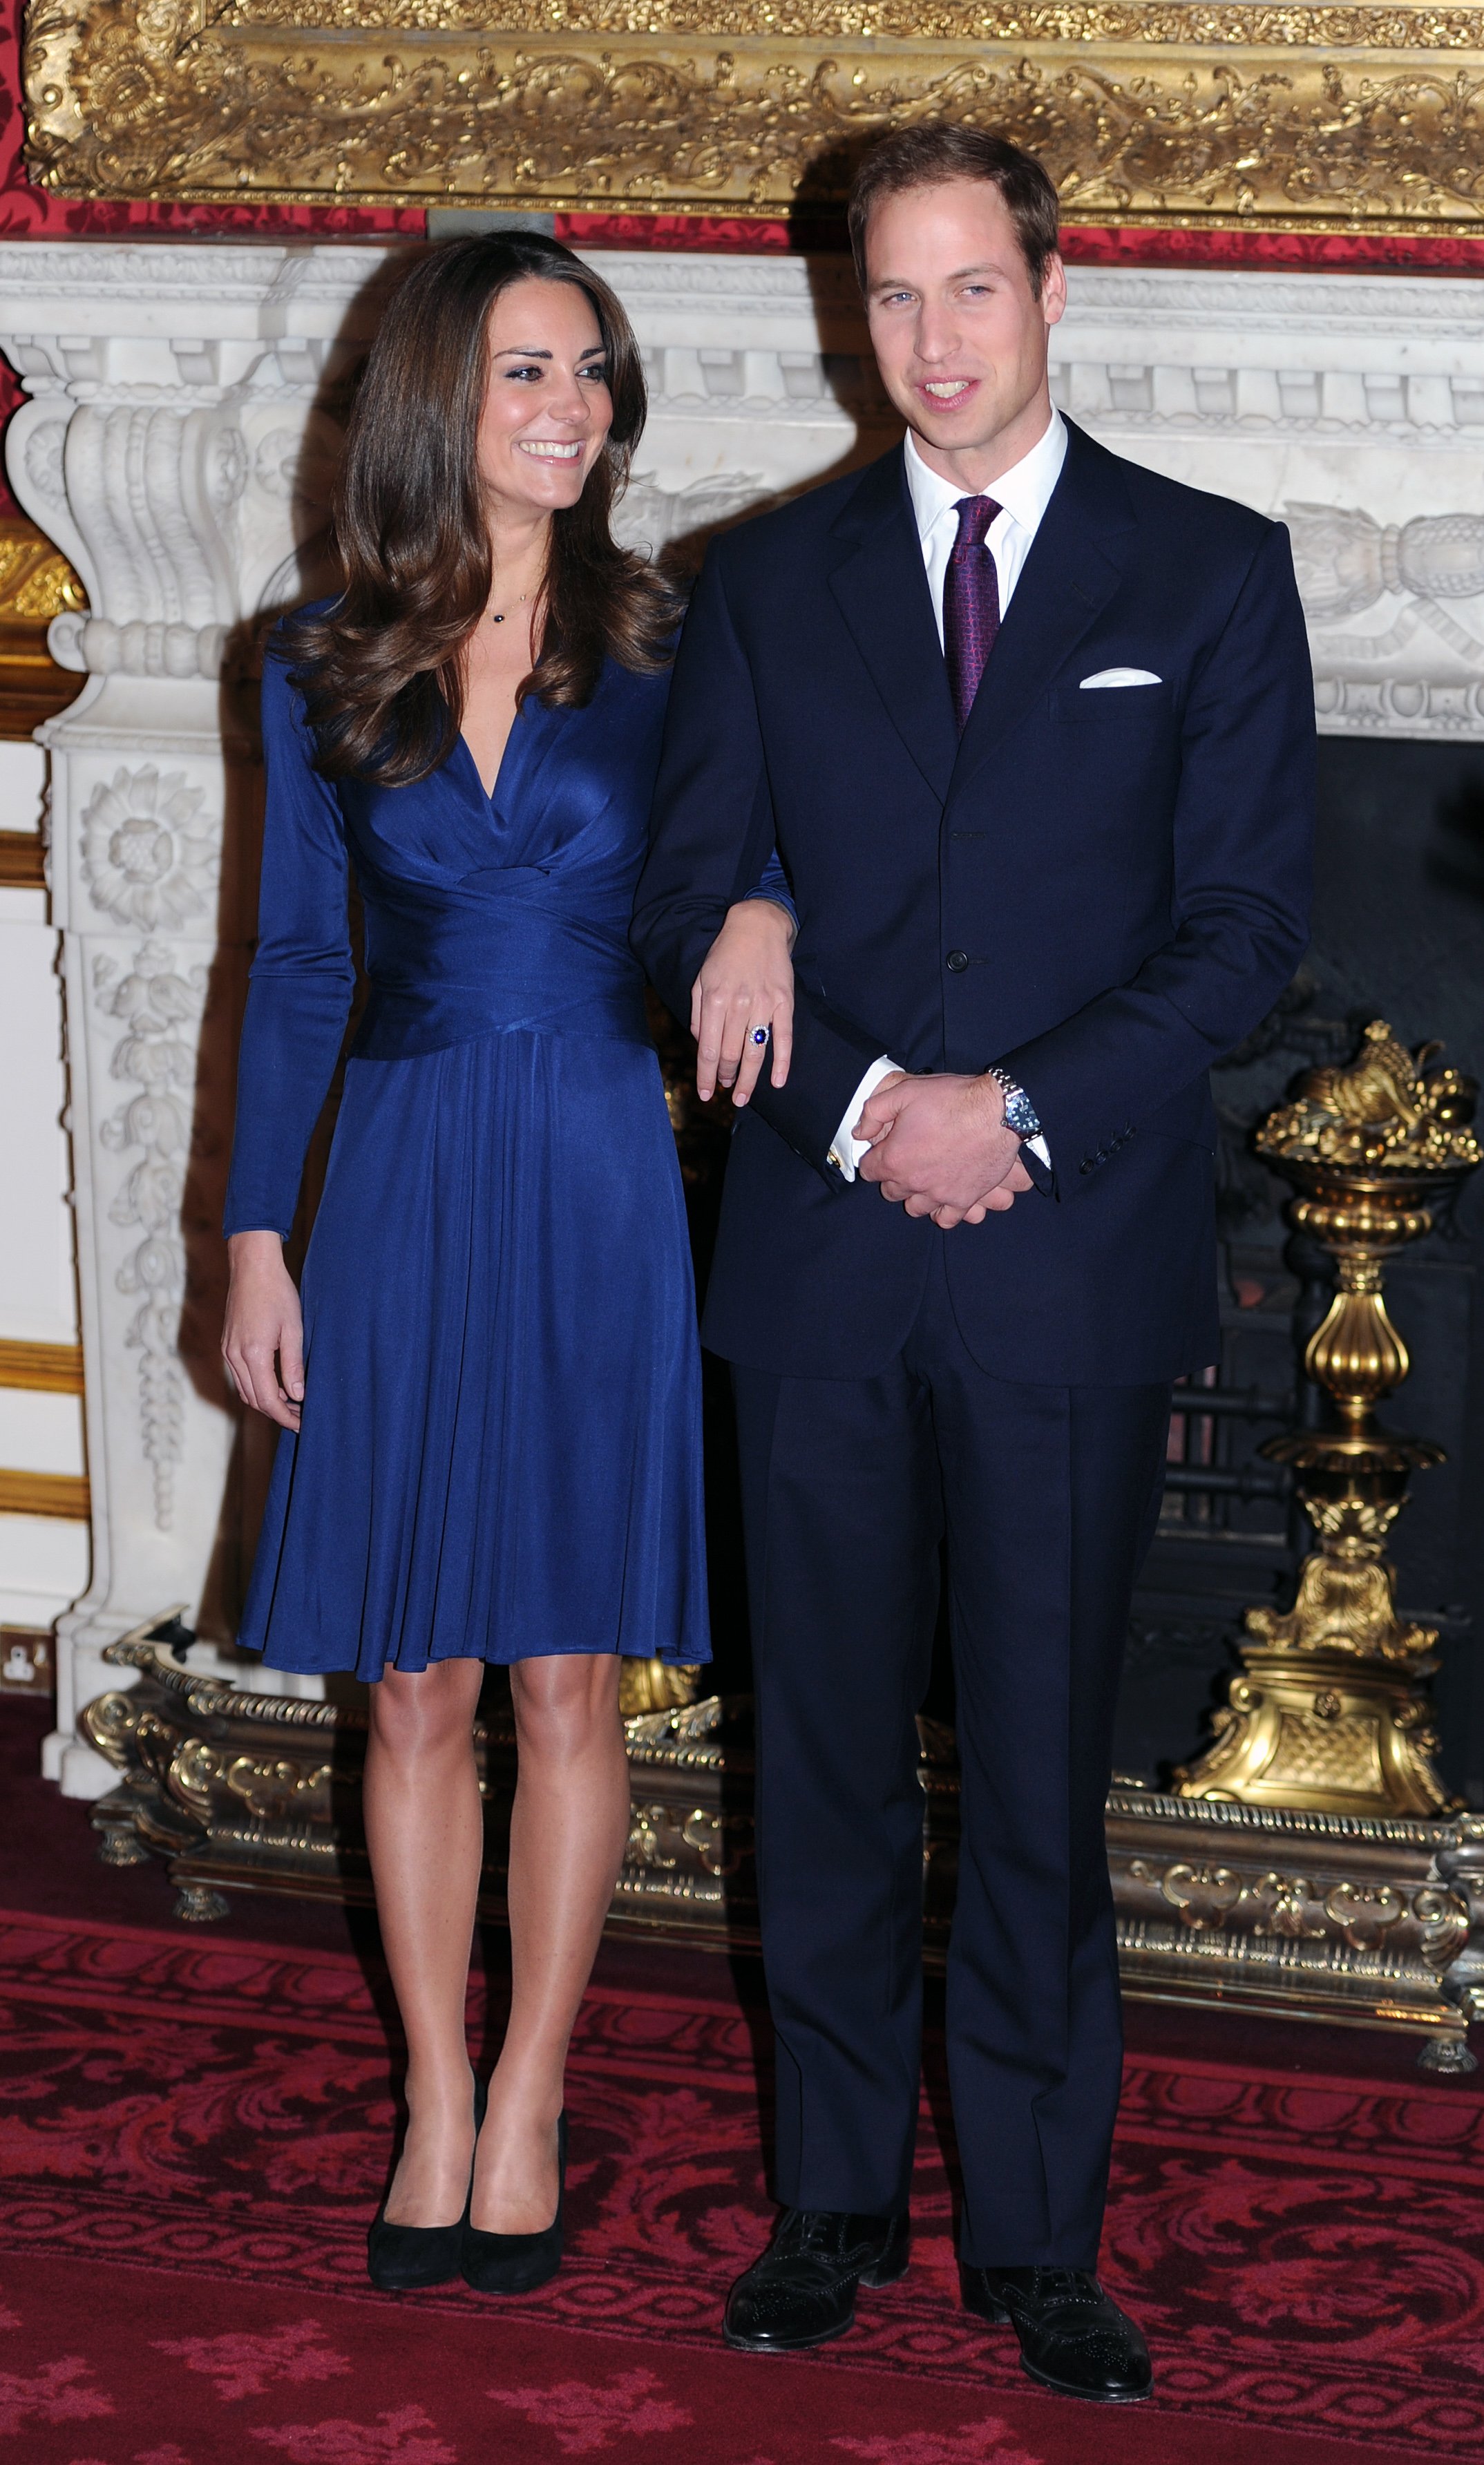 Catherine Middleton and Prince William pose for photographs in the State Apartments of St James Palace after announcing their engagement on November 16, 2010, in London, England | Source: Getty Images